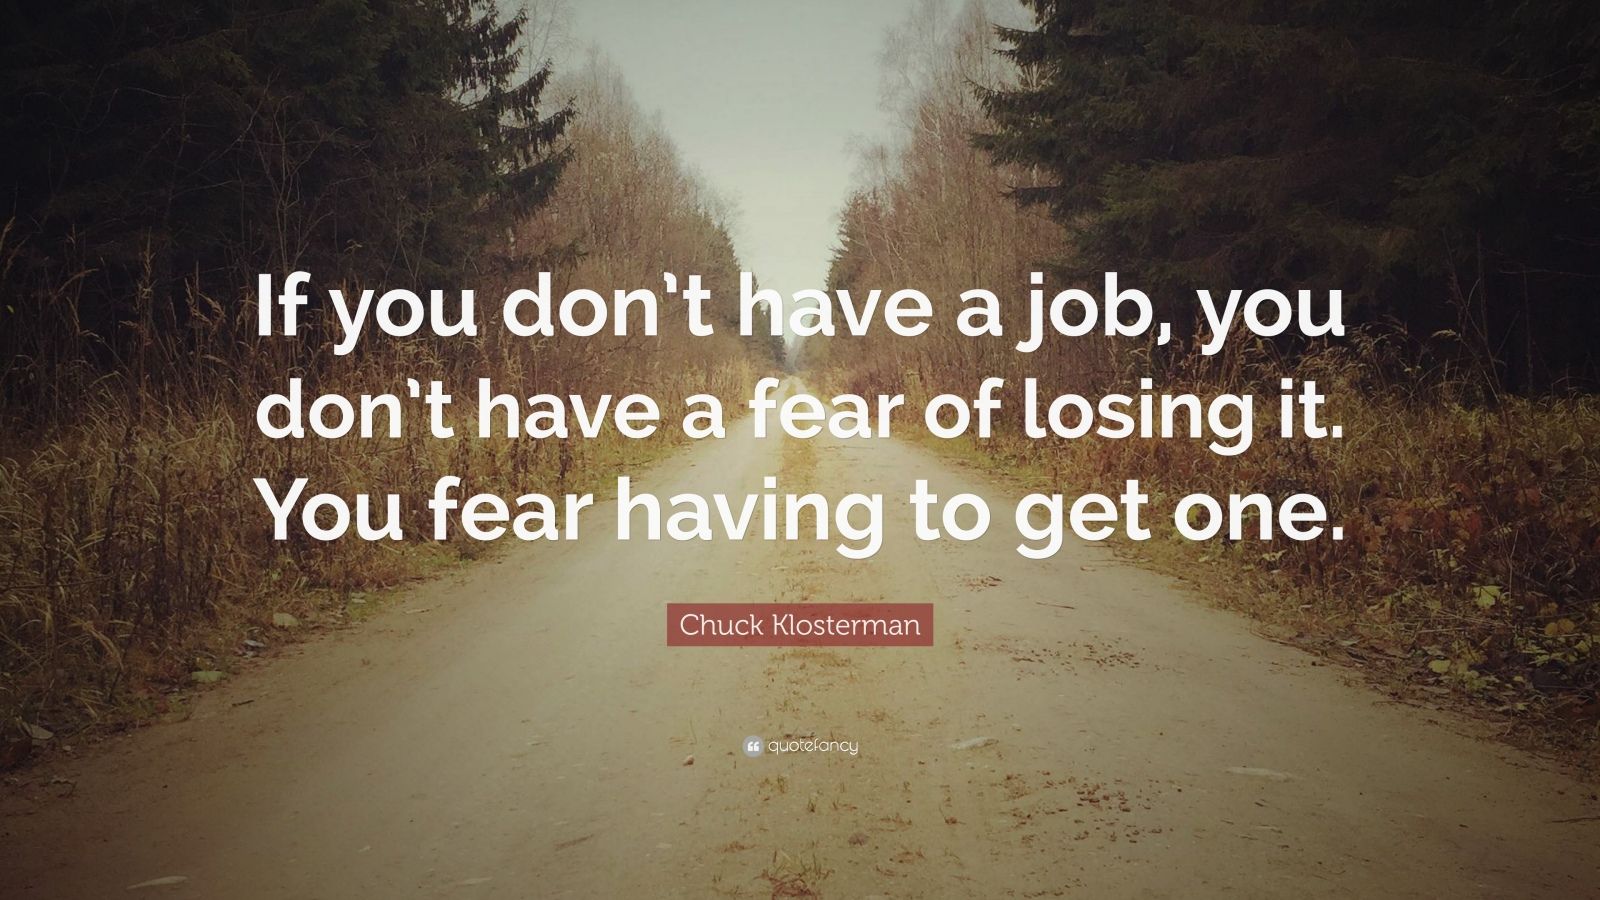 Chuck Klosterman Quote: “If you don’t have a job, you don’t have a fear